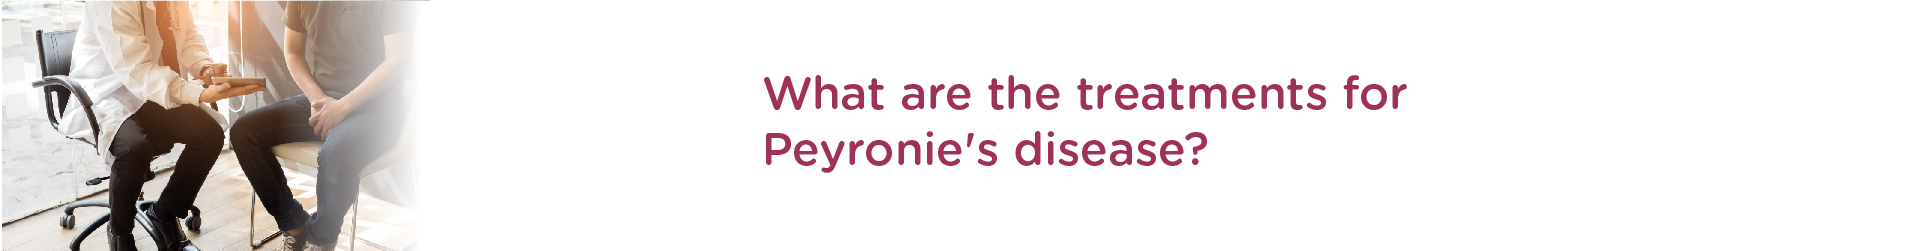 What are the Treatments for Peyronie's Disease?